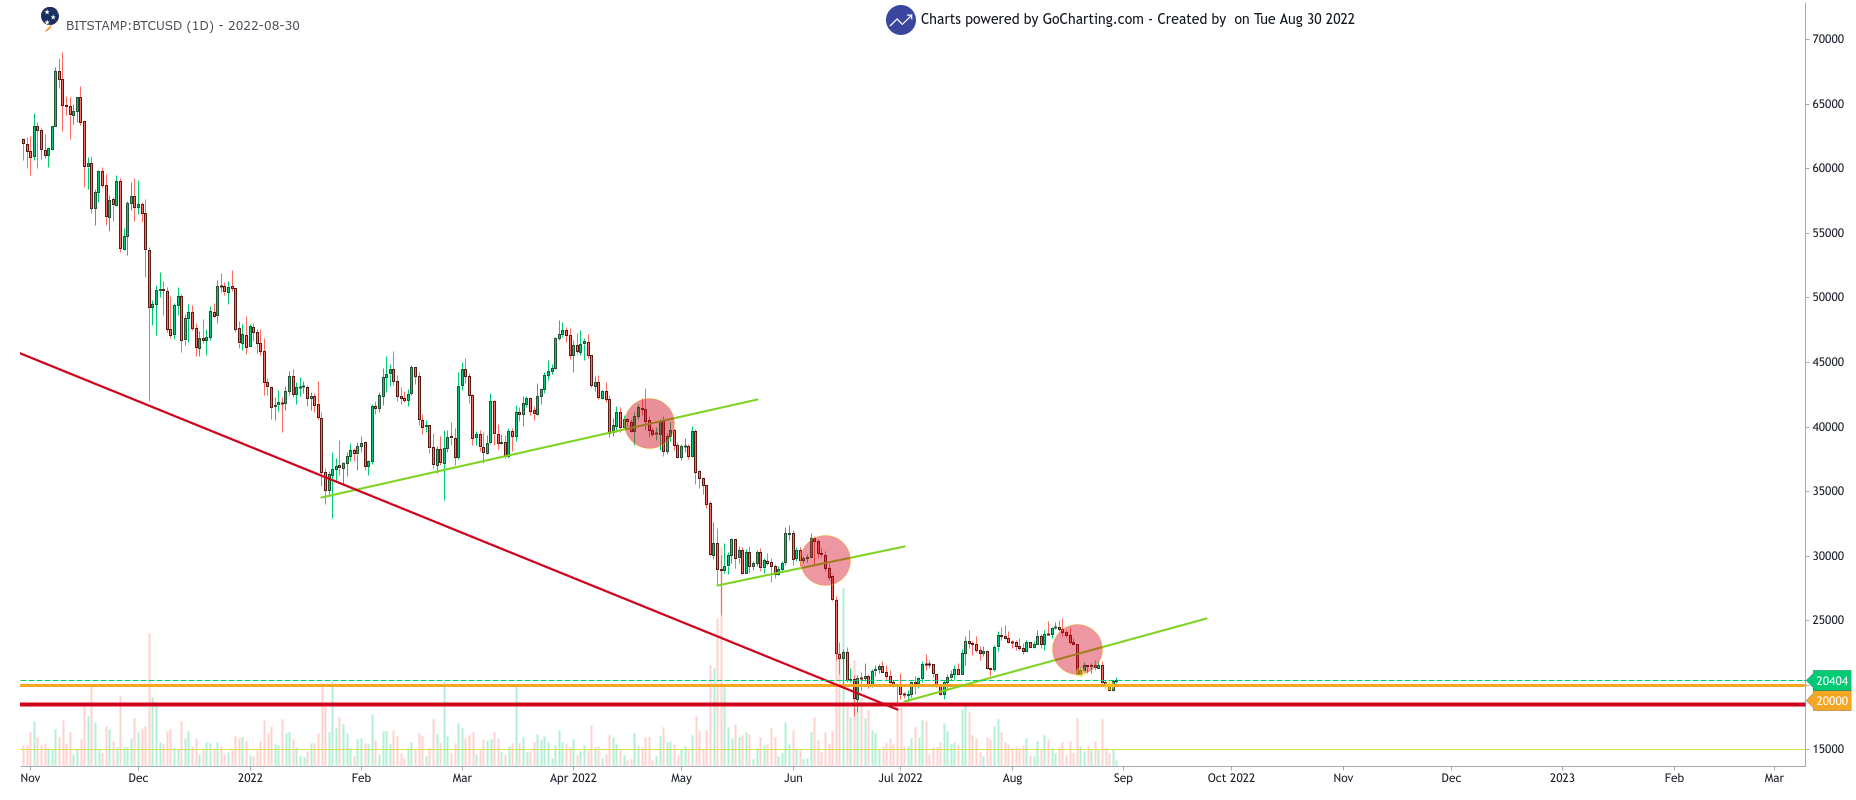 BTC/USD 1-day chart showing the downtrend of BTC in 2022